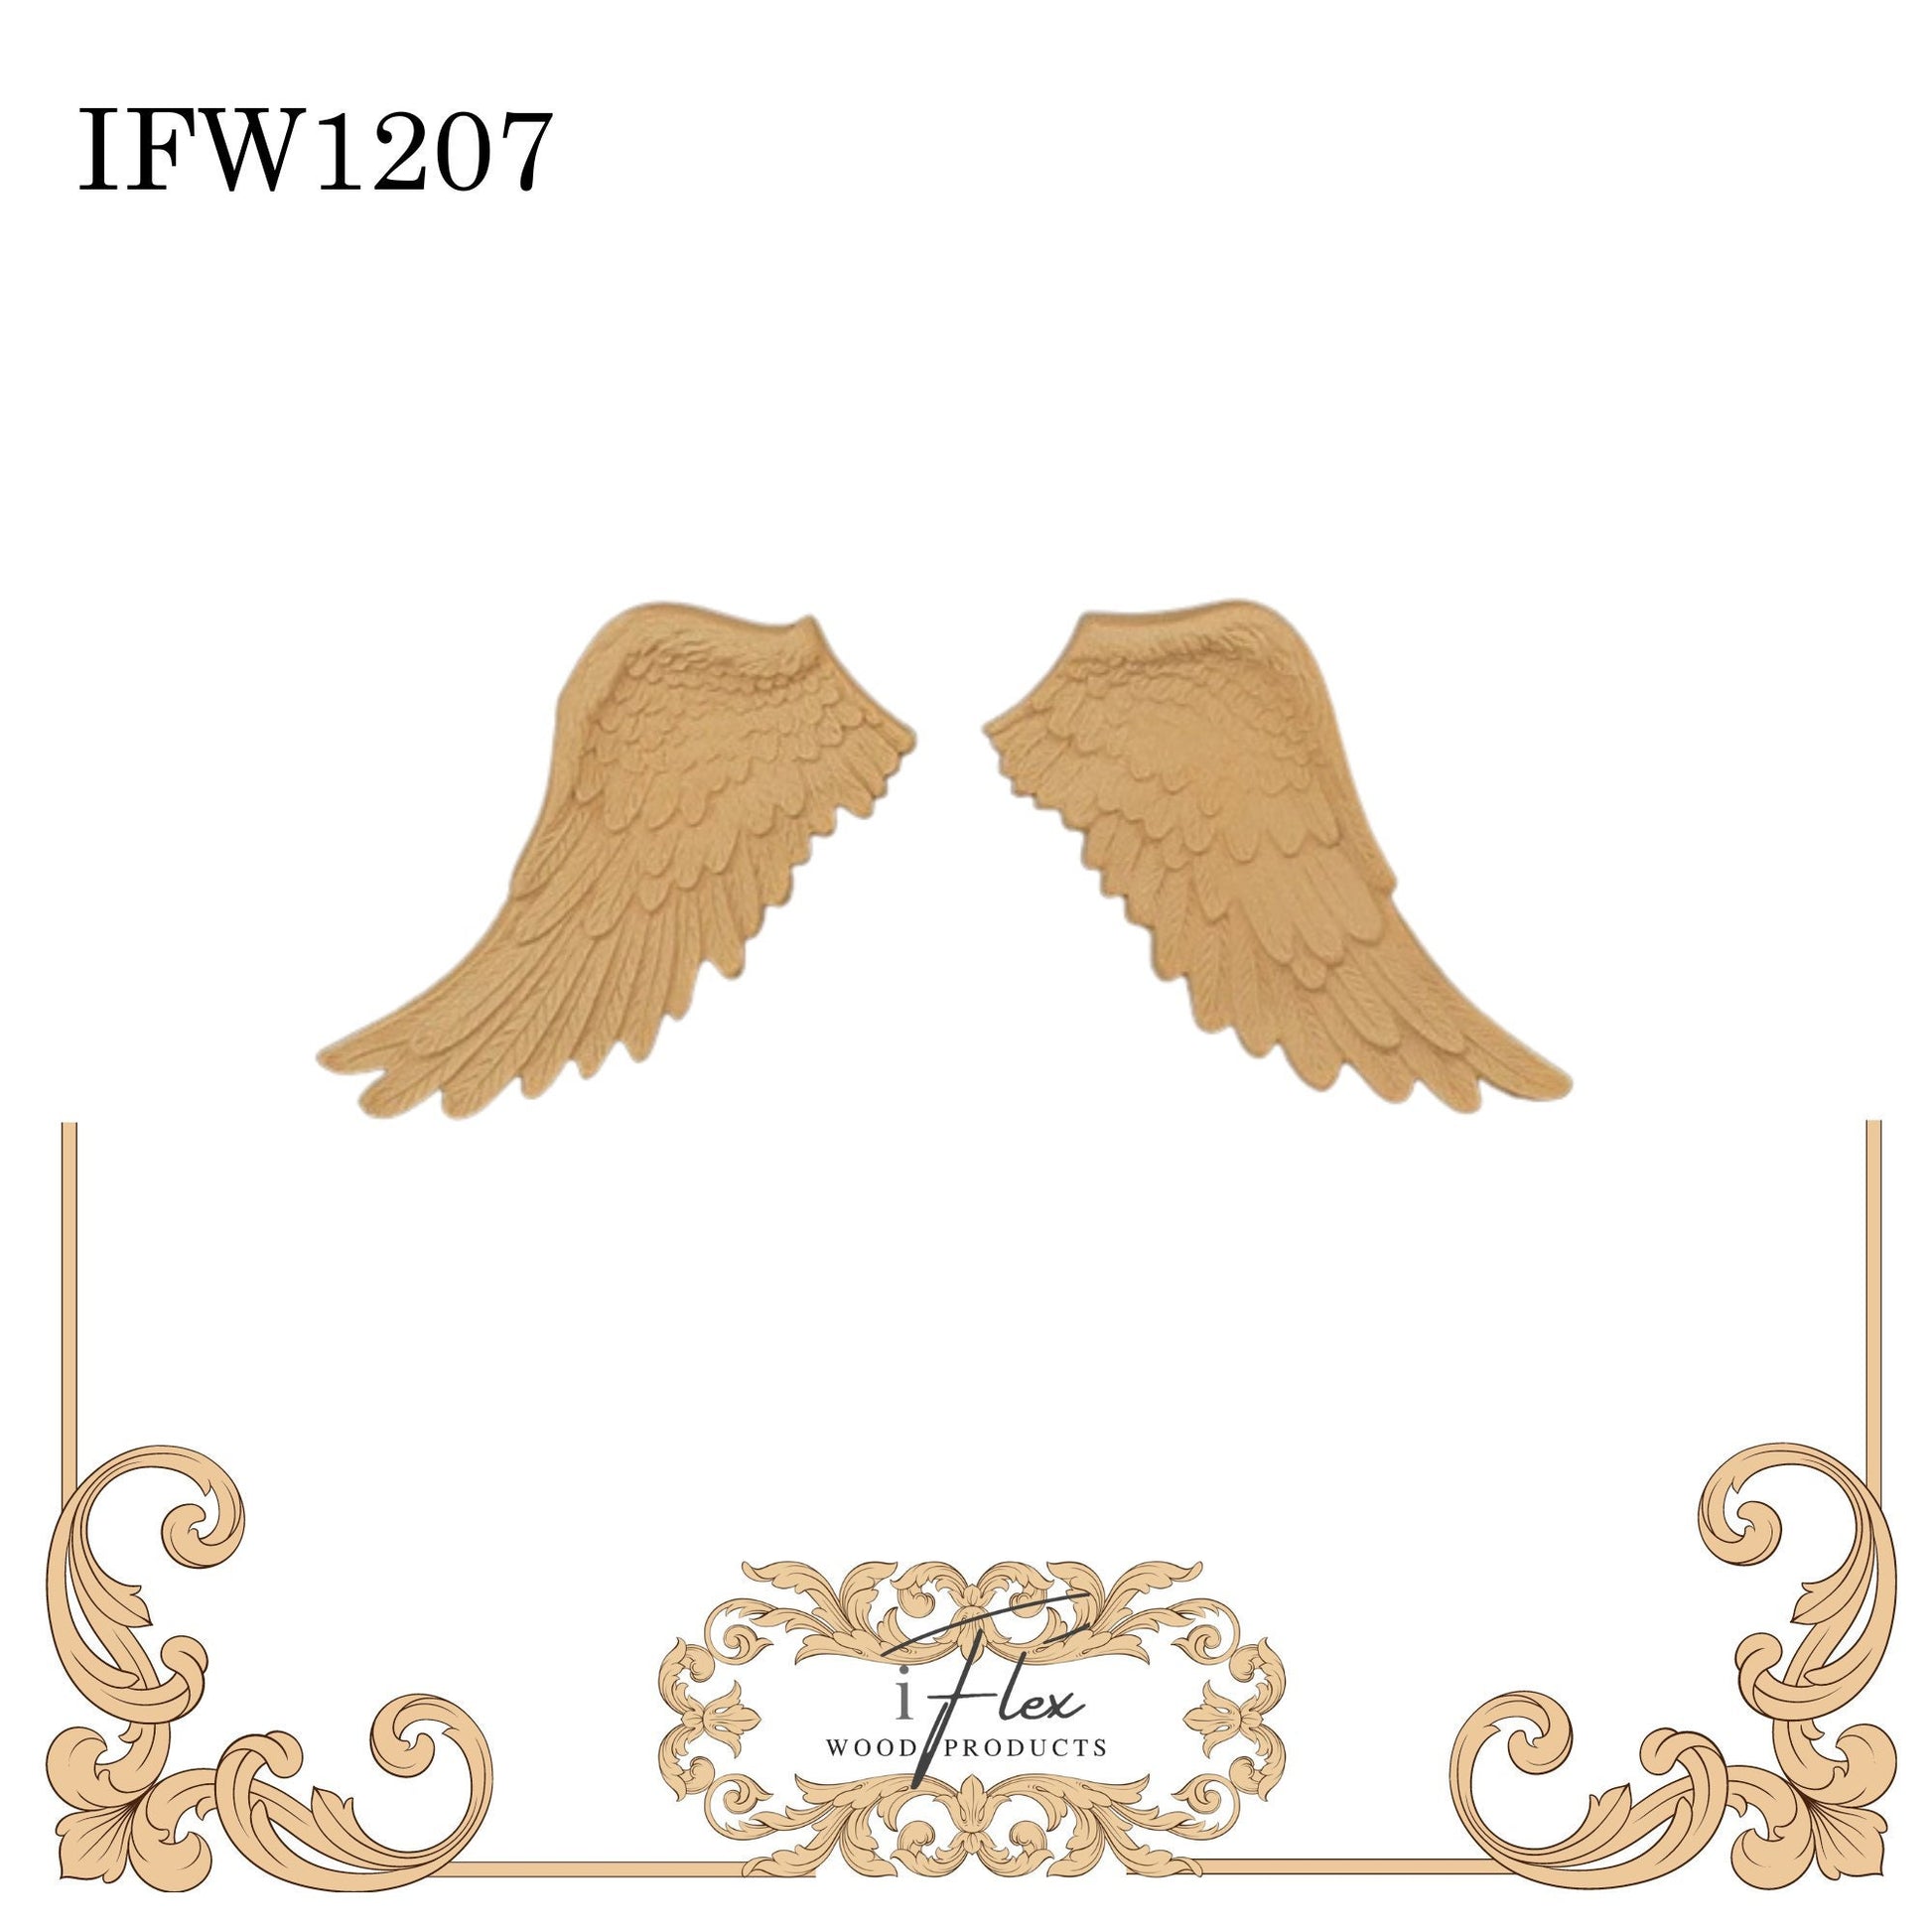 IFW 1207 iFlex Wood Products, bendable mouldings, flexible, wooden appliques, wings